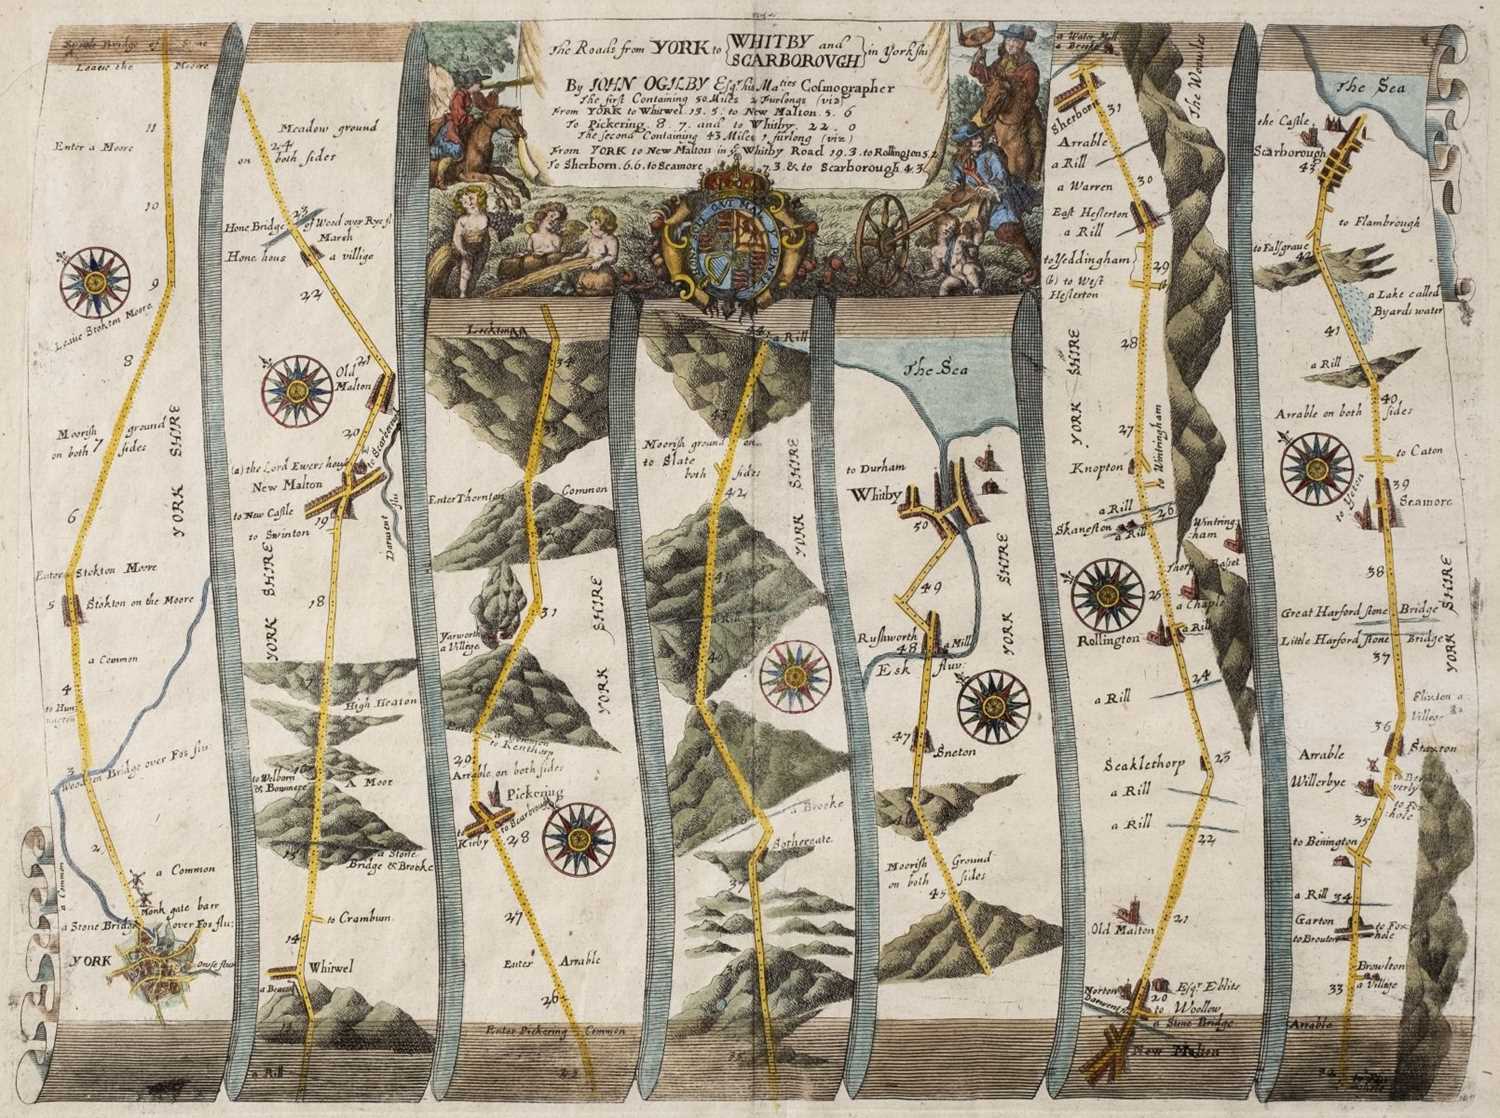 Lot 76 - Ogilby (John). The Roads from York to Whitby and Scarborough in Yorkshi...., circa 1680